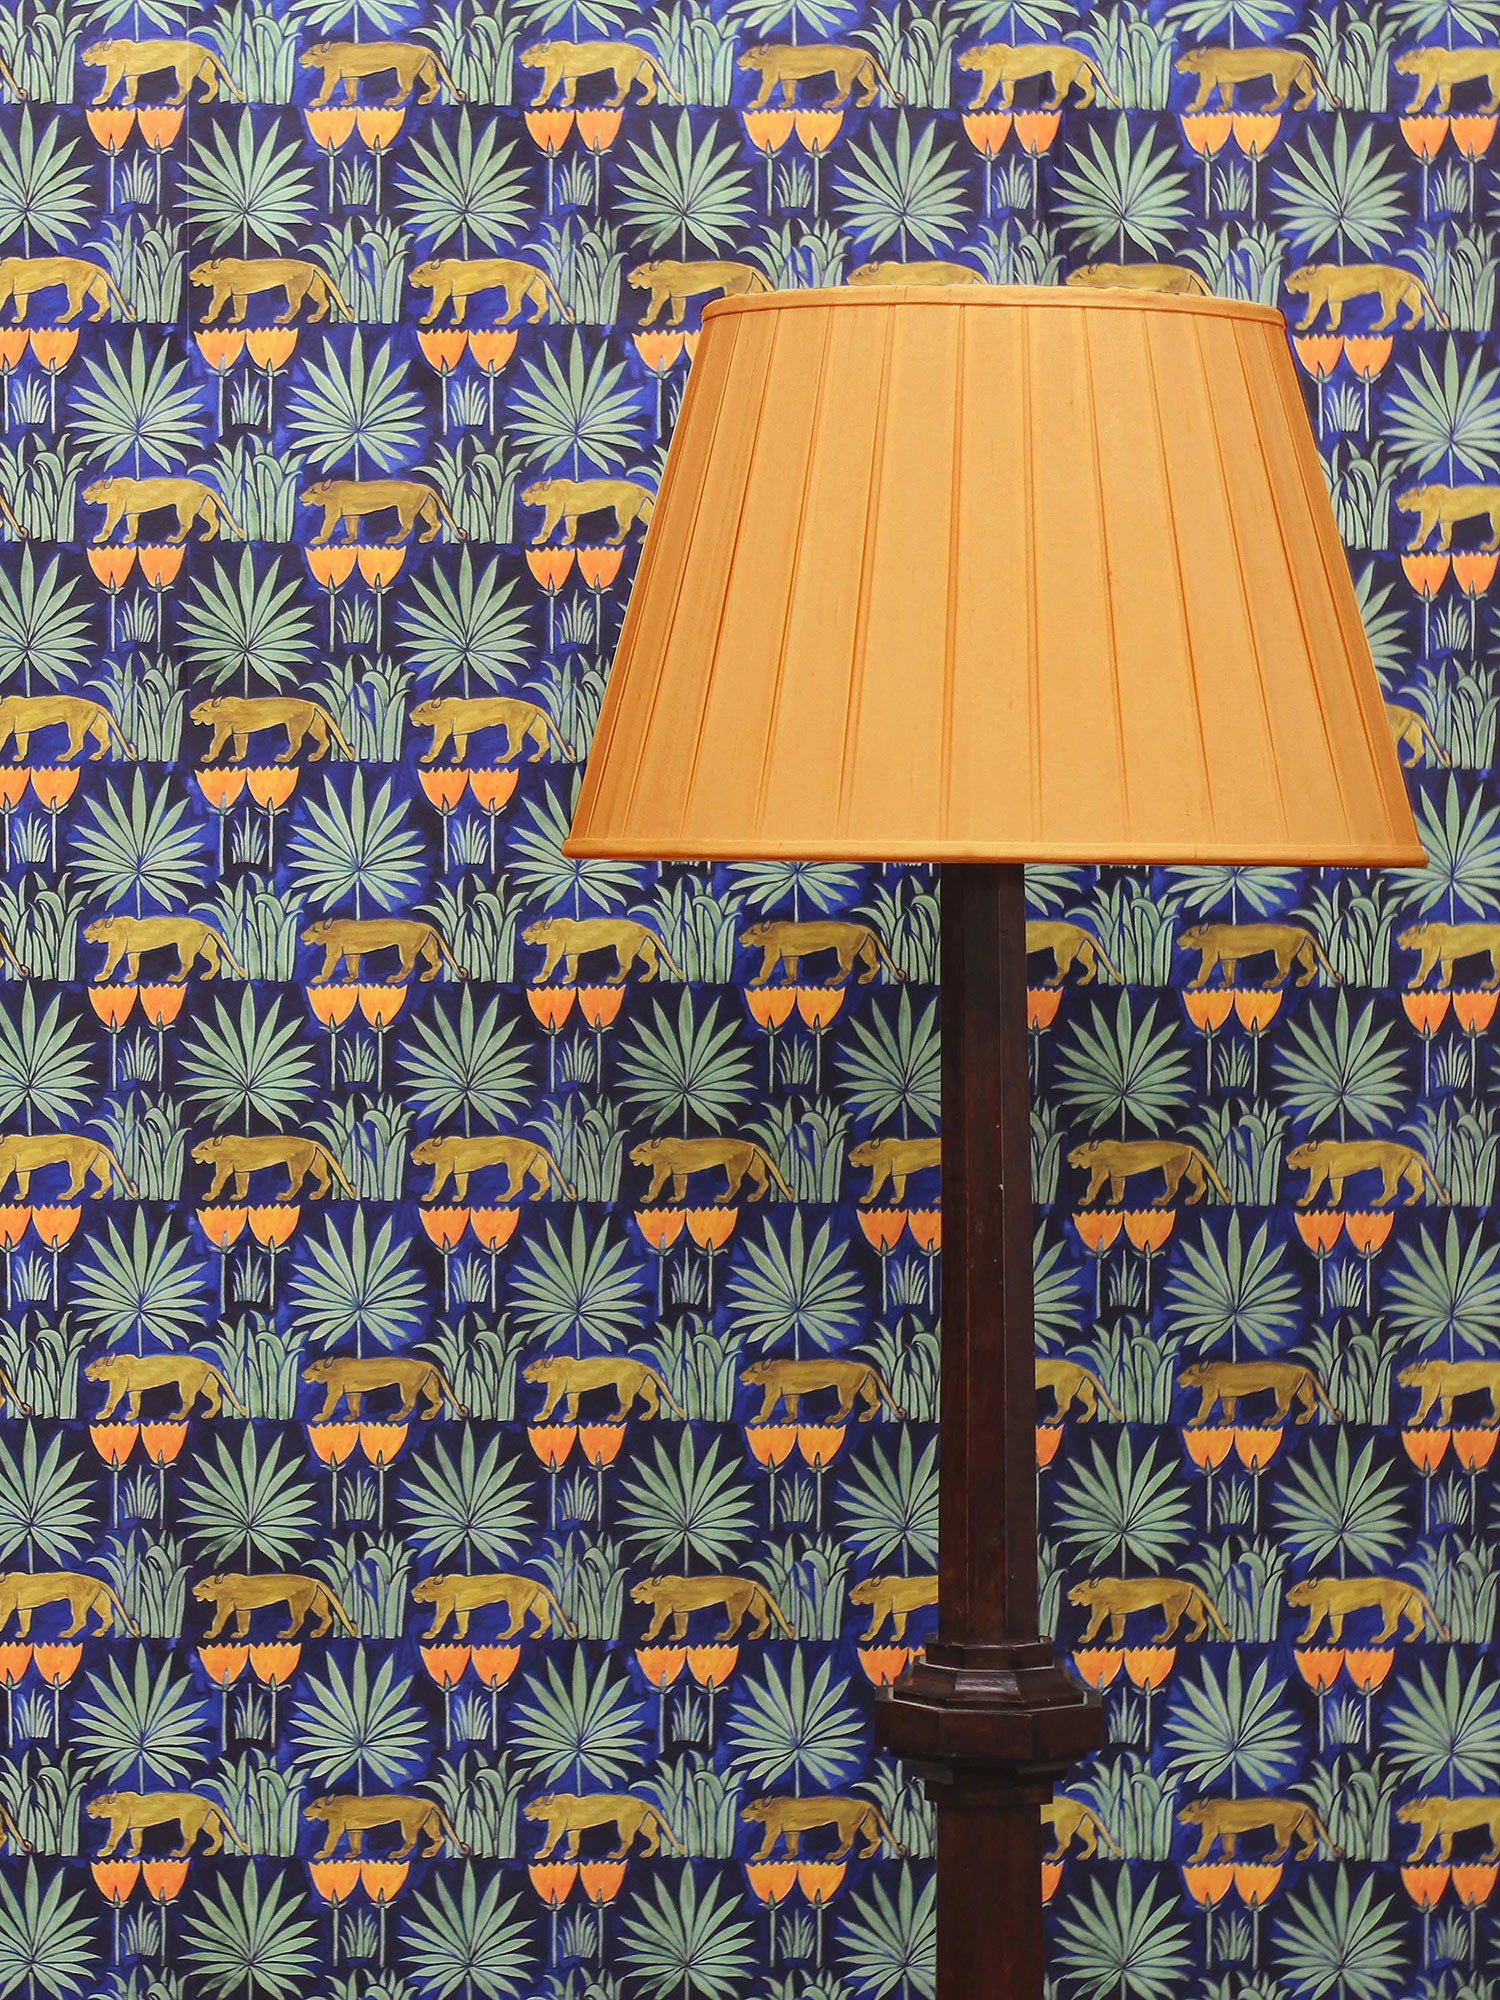 A tropical Arts & Crafts design in midnight blue, yellow and green, based on a 1918 watercolour drawing by Voysey found in the V&A archive, pictured with a yellow lampshade